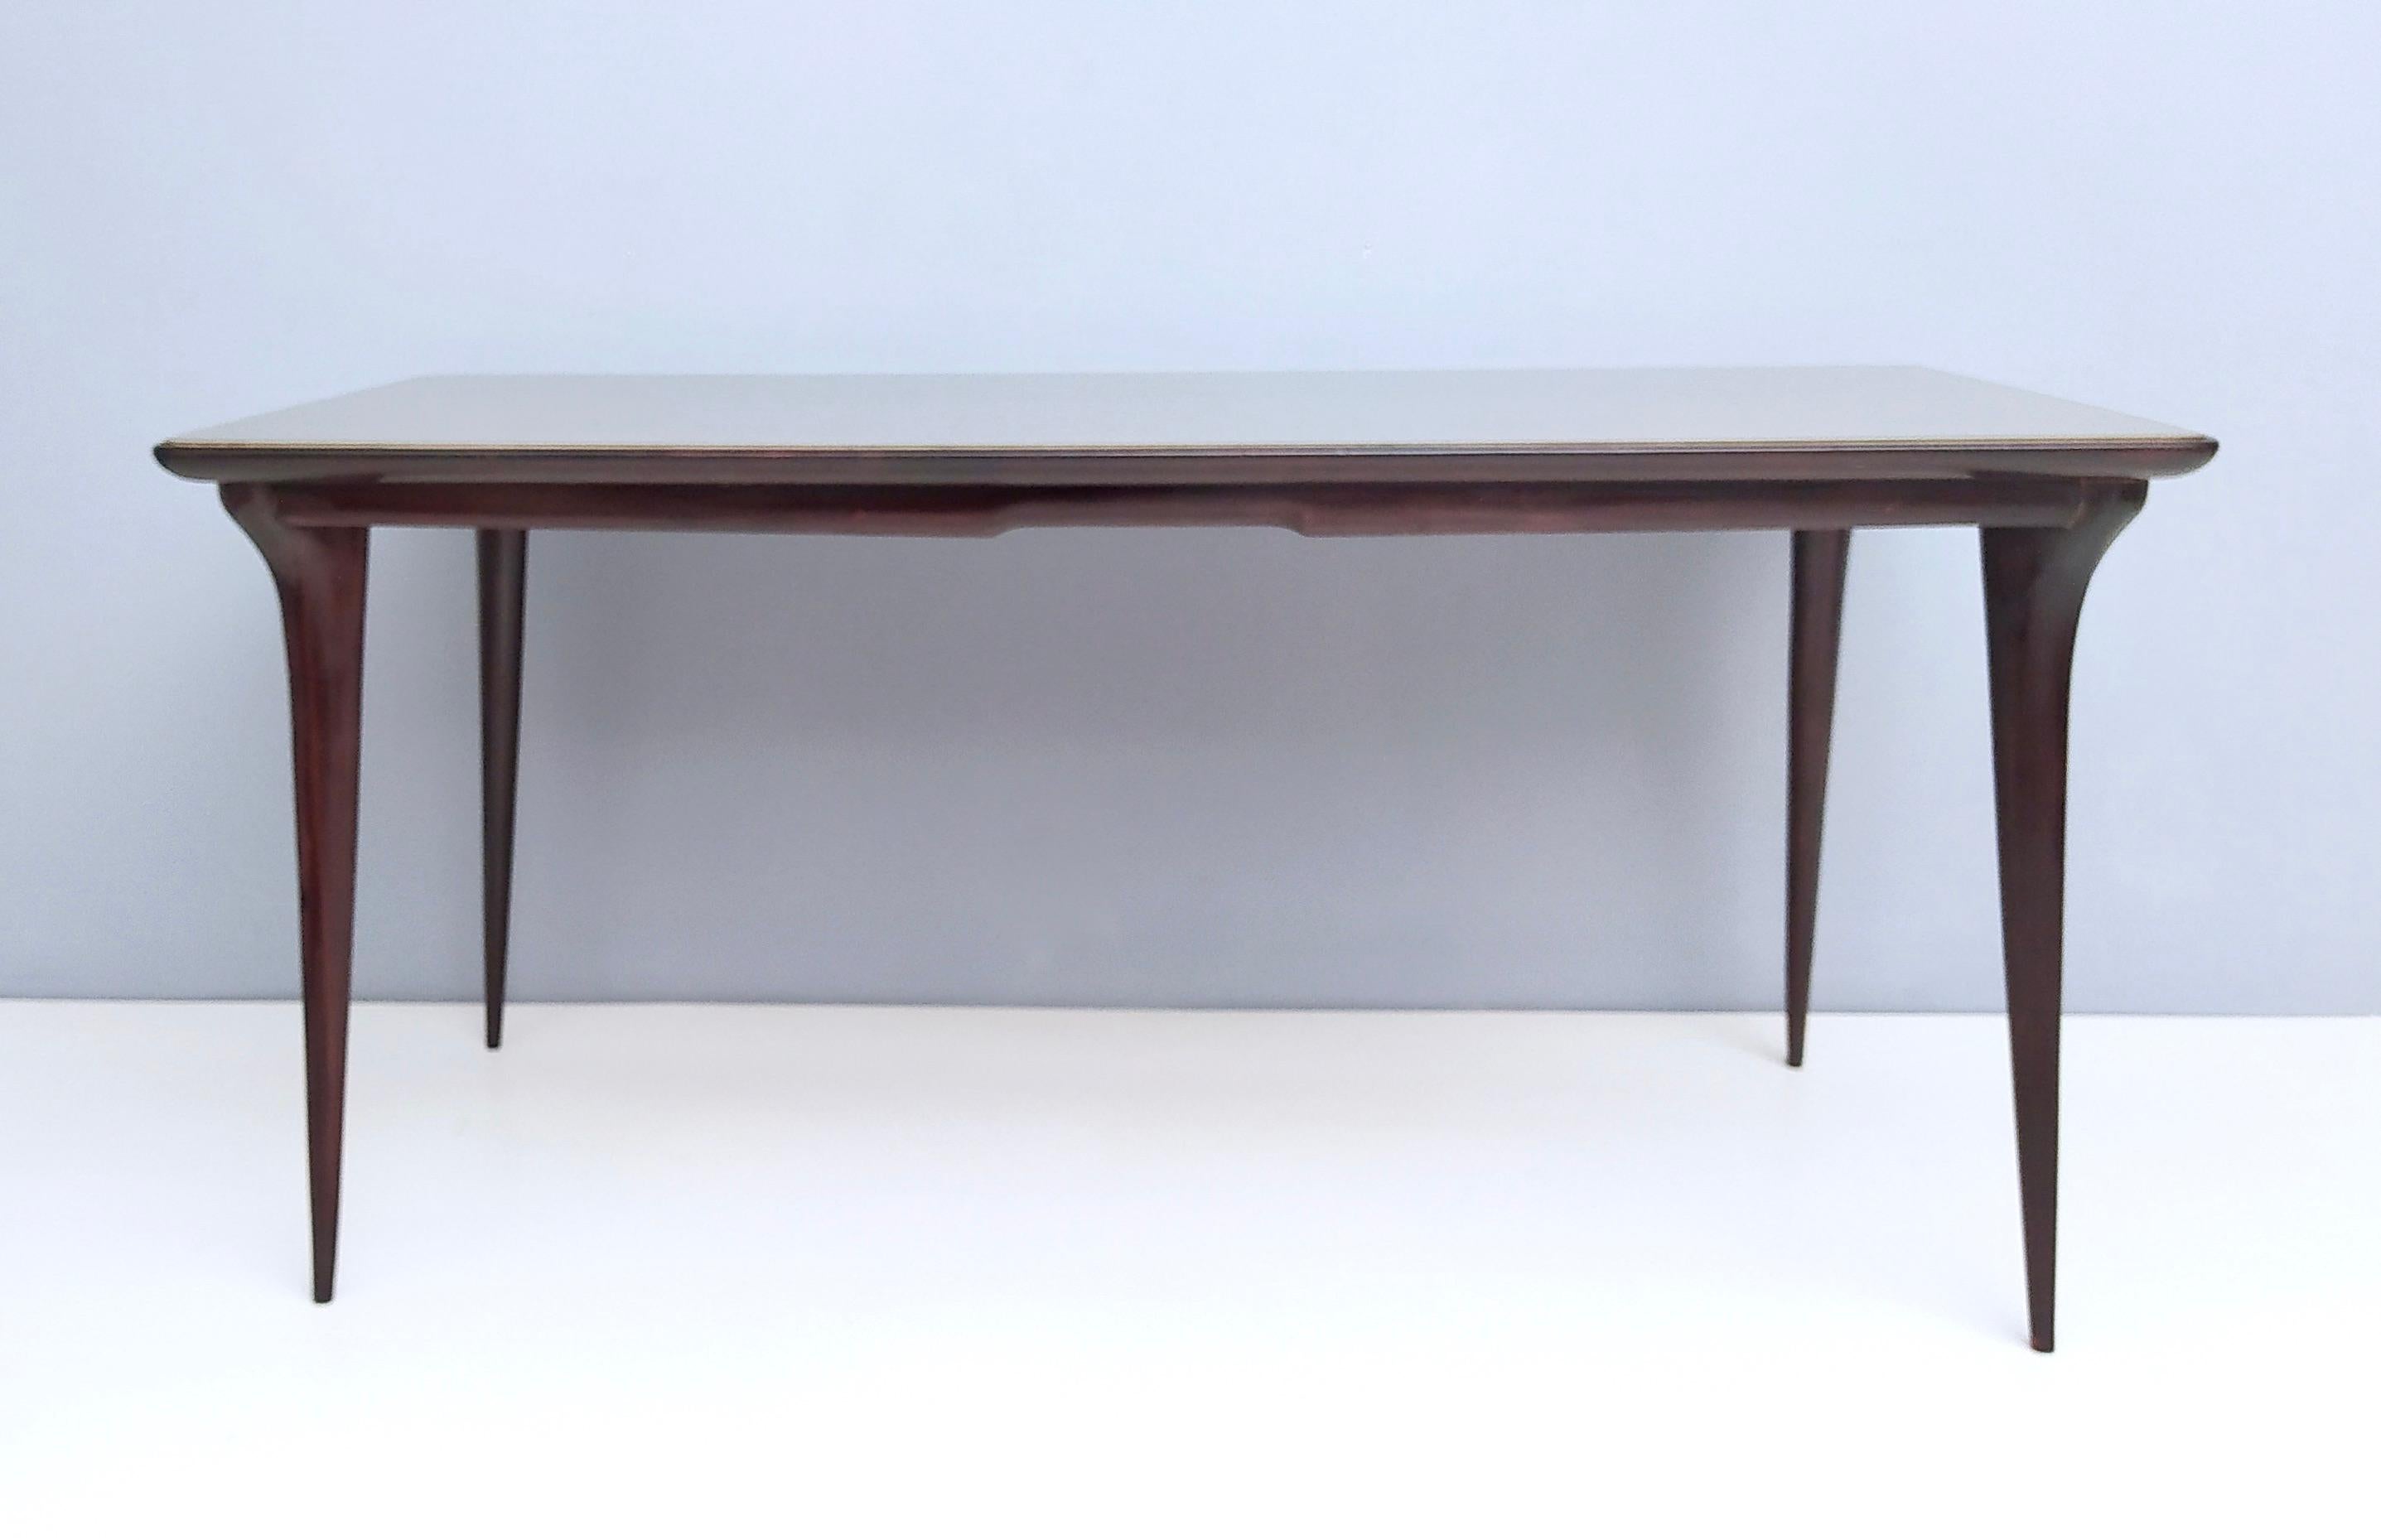 Rectangular Ebonized Beech Dining Table with a Taupe Glass Top, Italy In Excellent Condition For Sale In Bresso, Lombardy